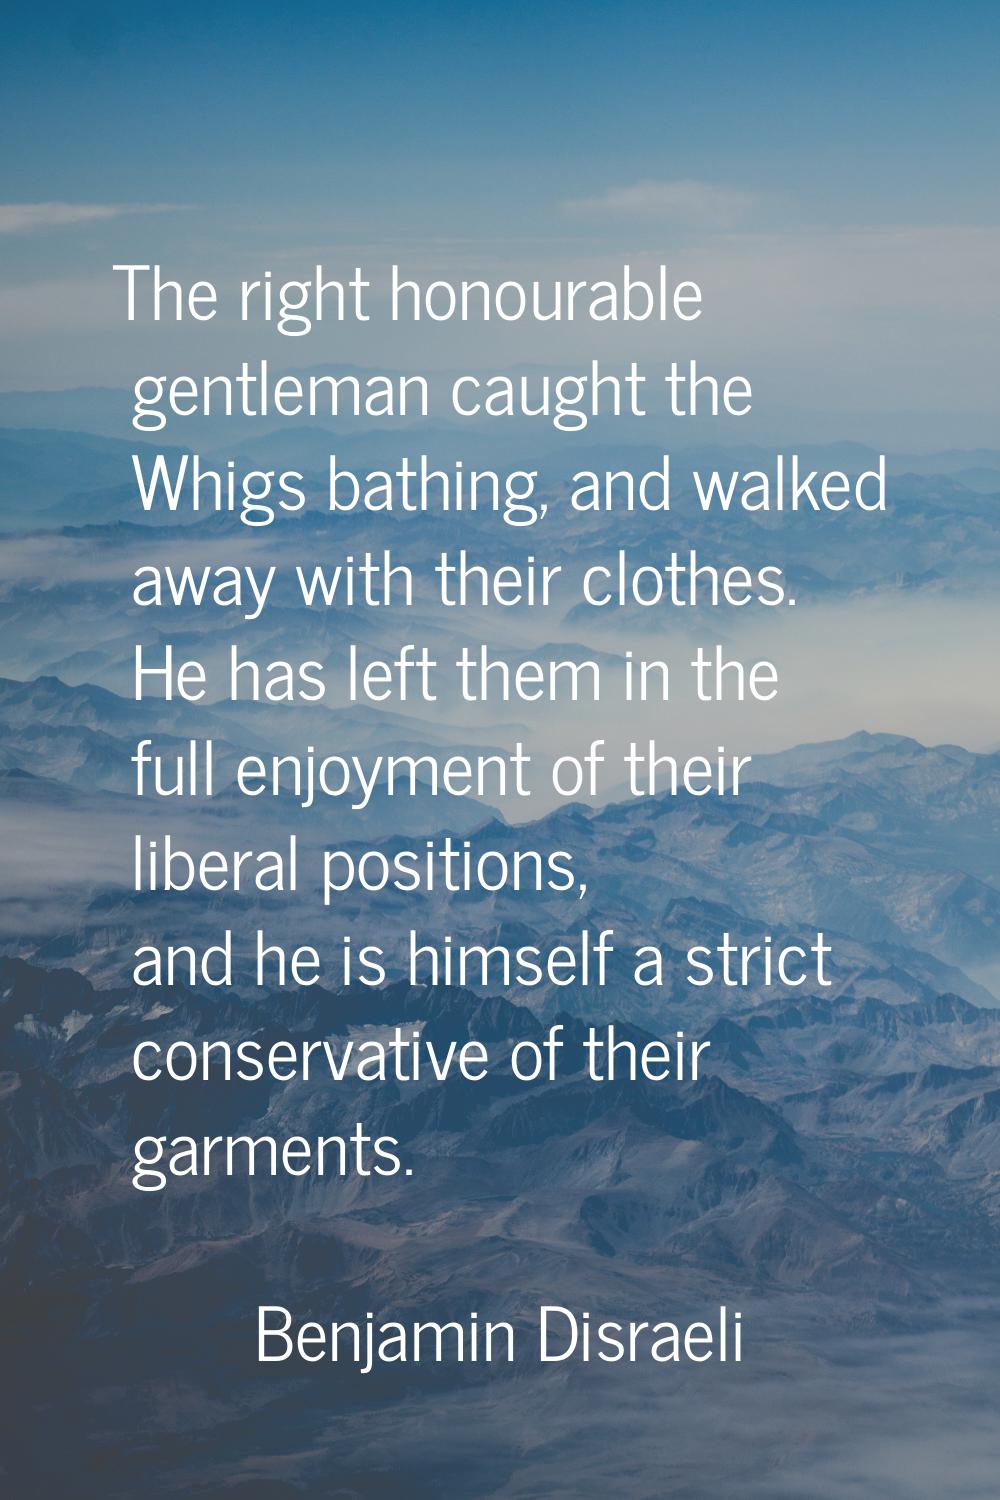 The right honourable gentleman caught the Whigs bathing, and walked away with their clothes. He has